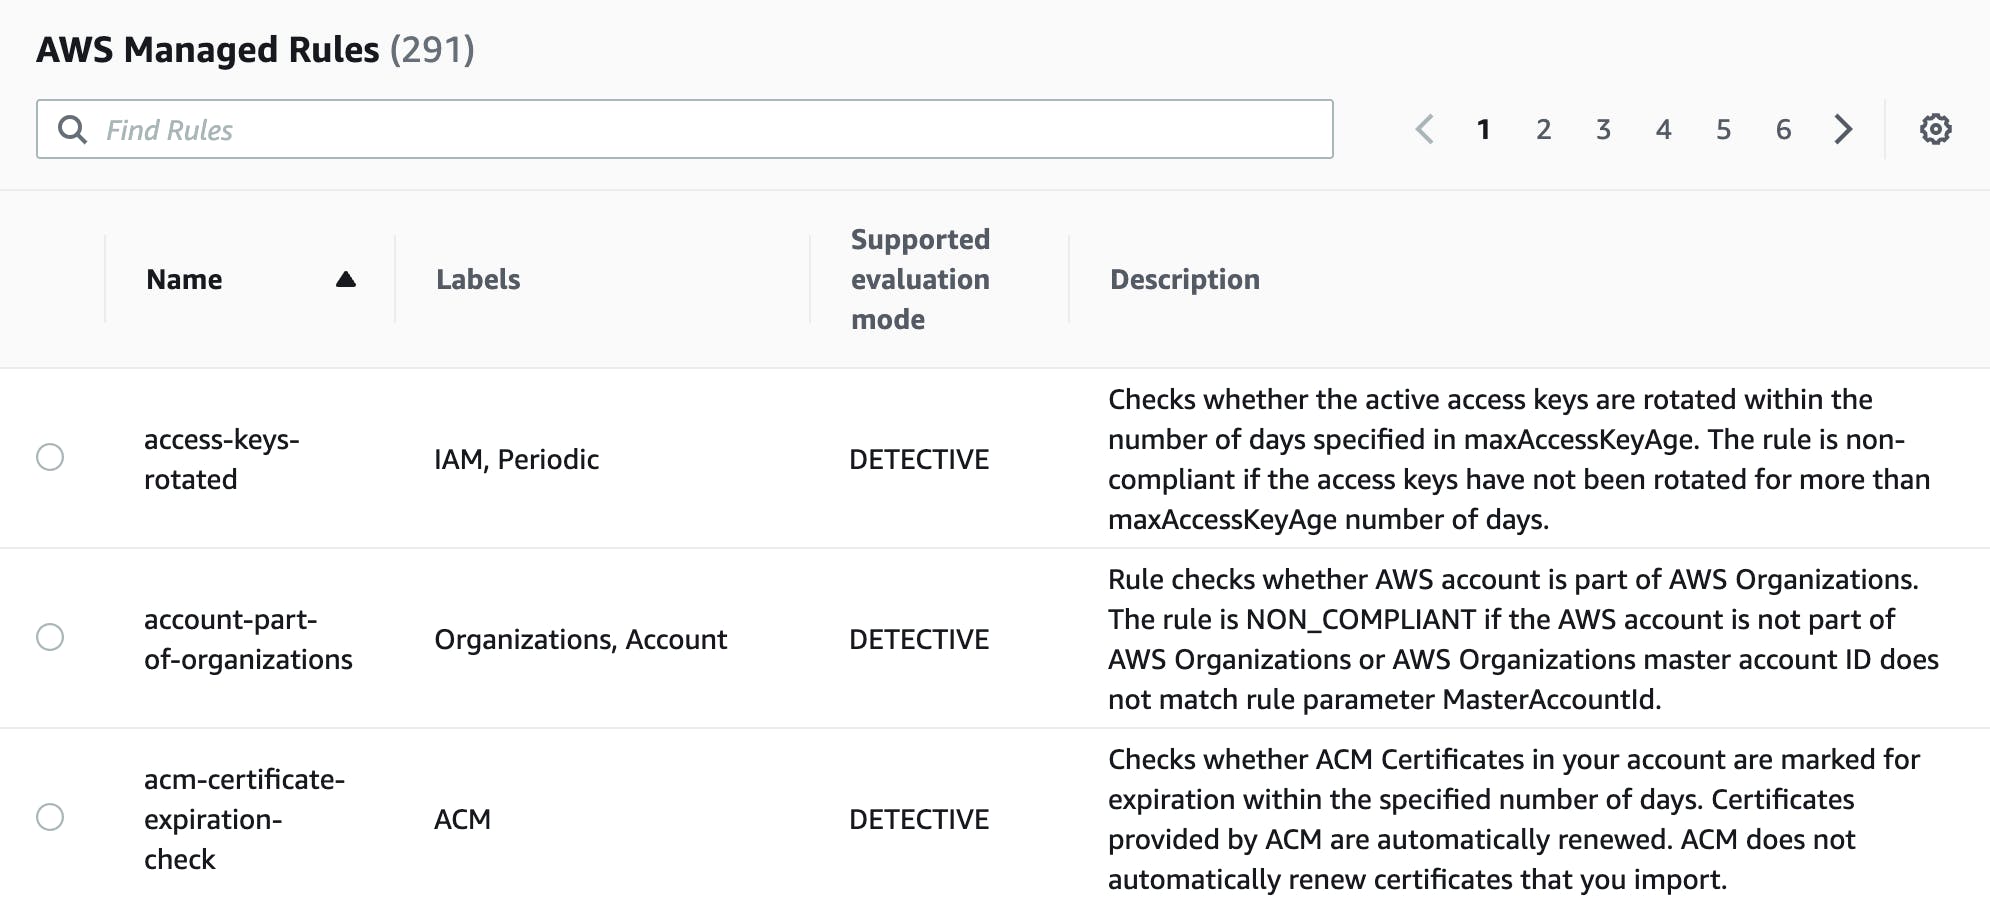 AWS Config offers managed rules to apply